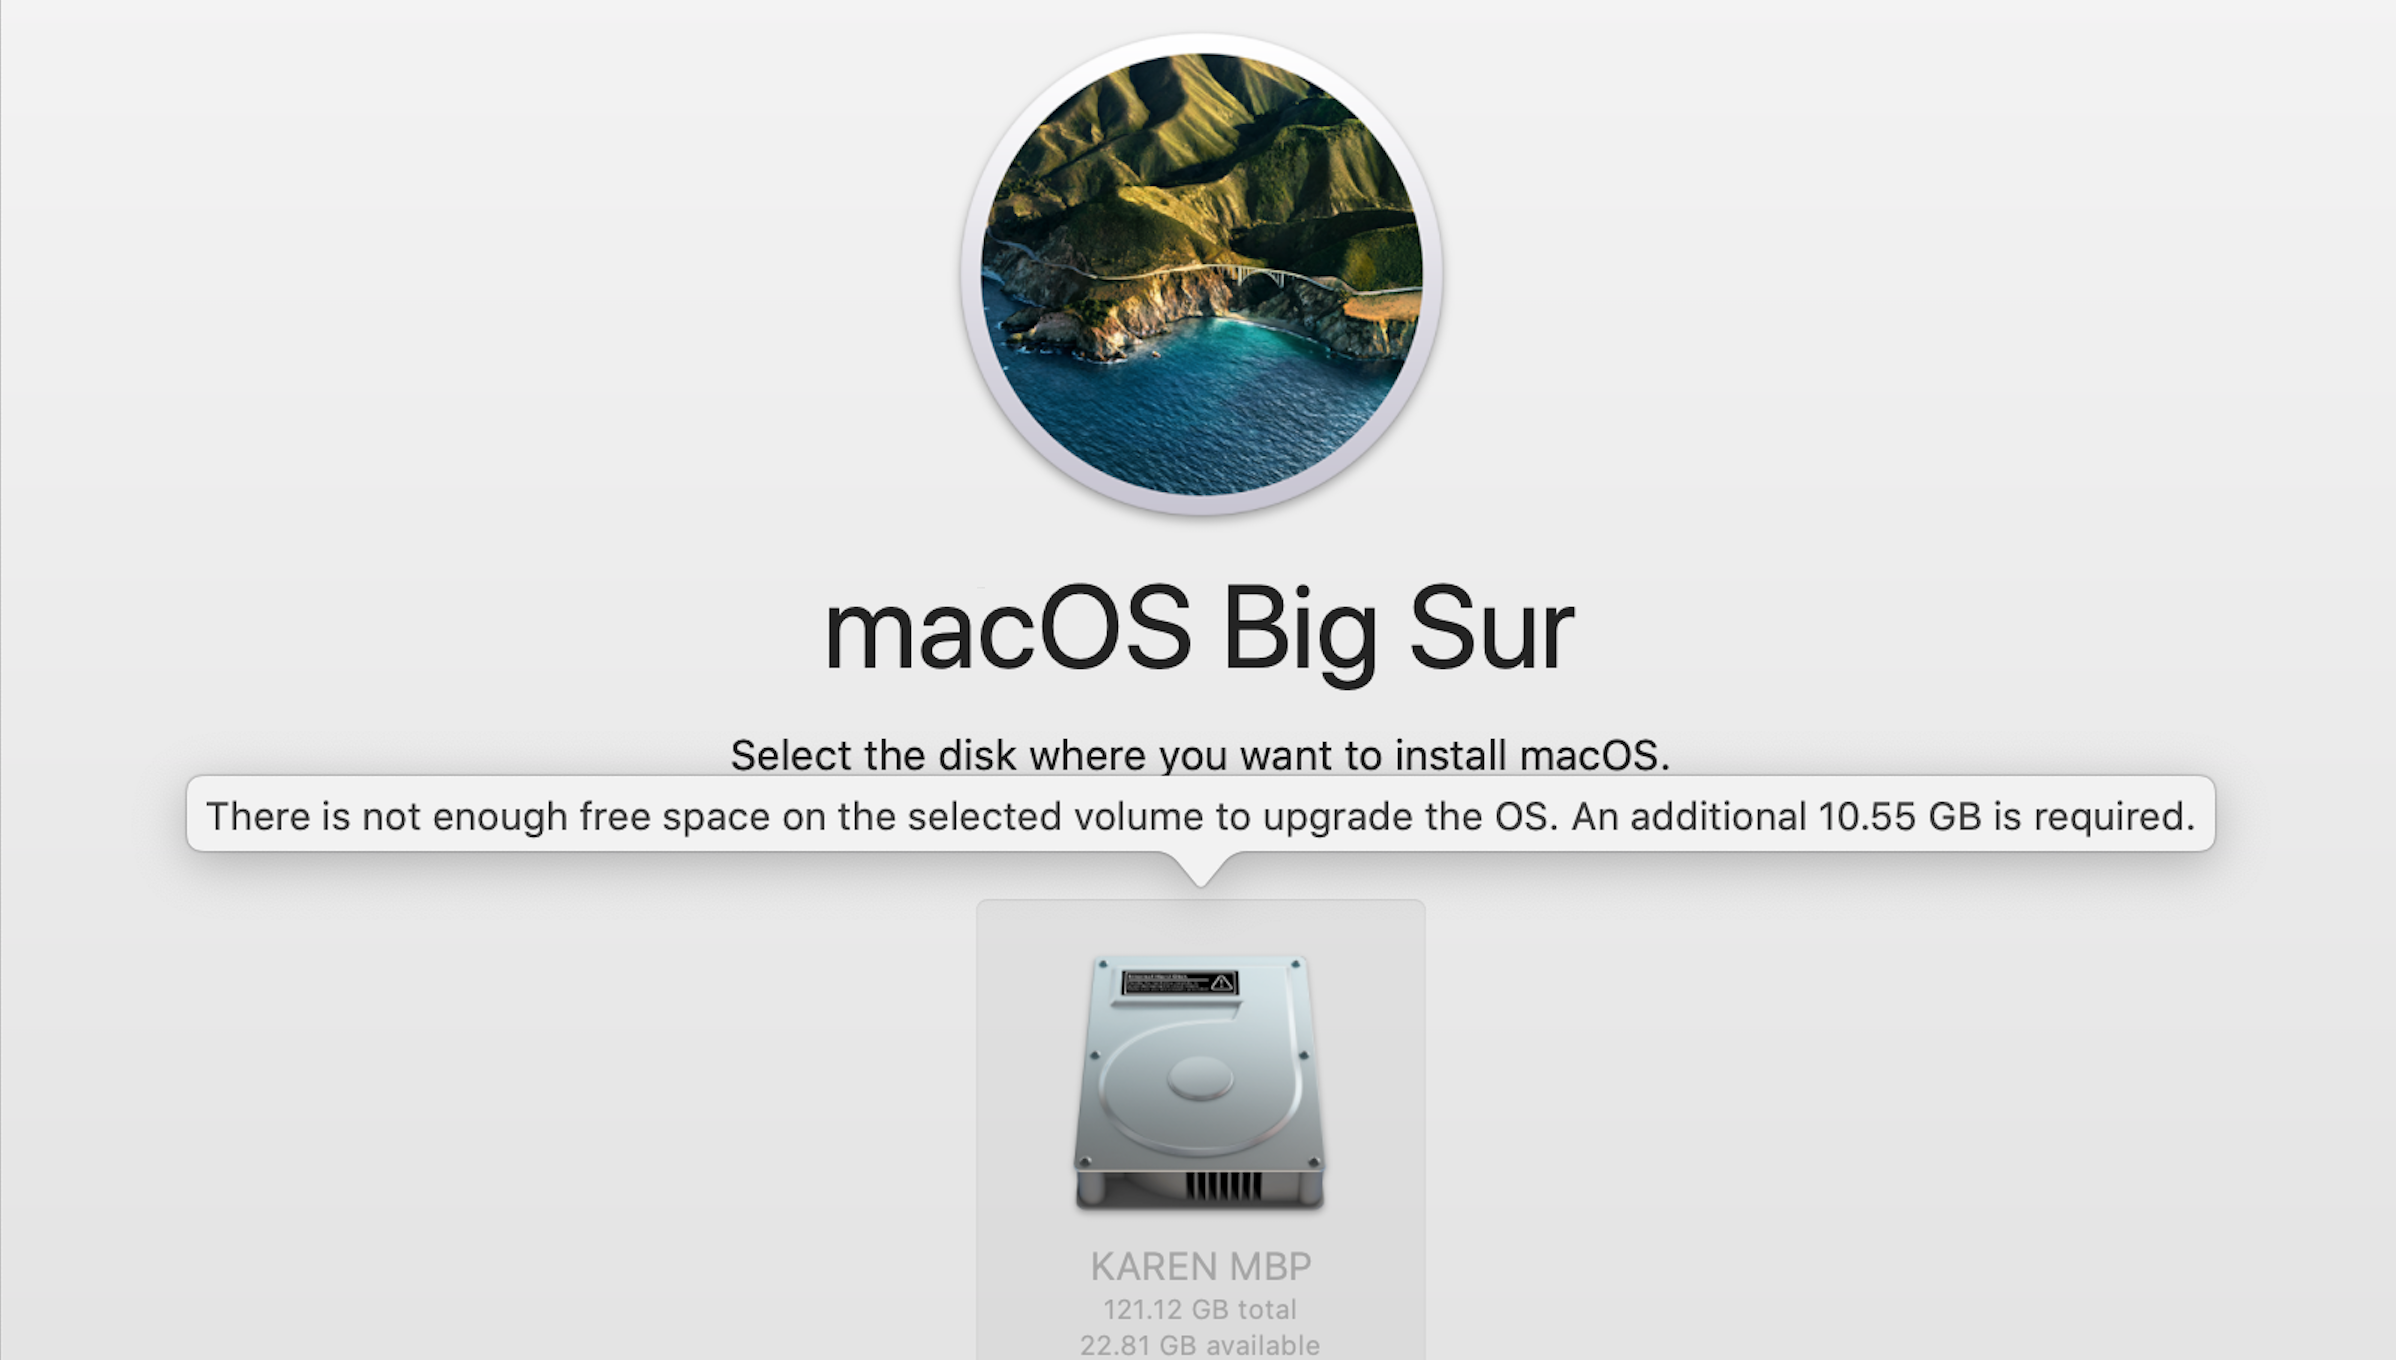 Don’t bother trying to update to Big Sur if you have a 128GB Mac